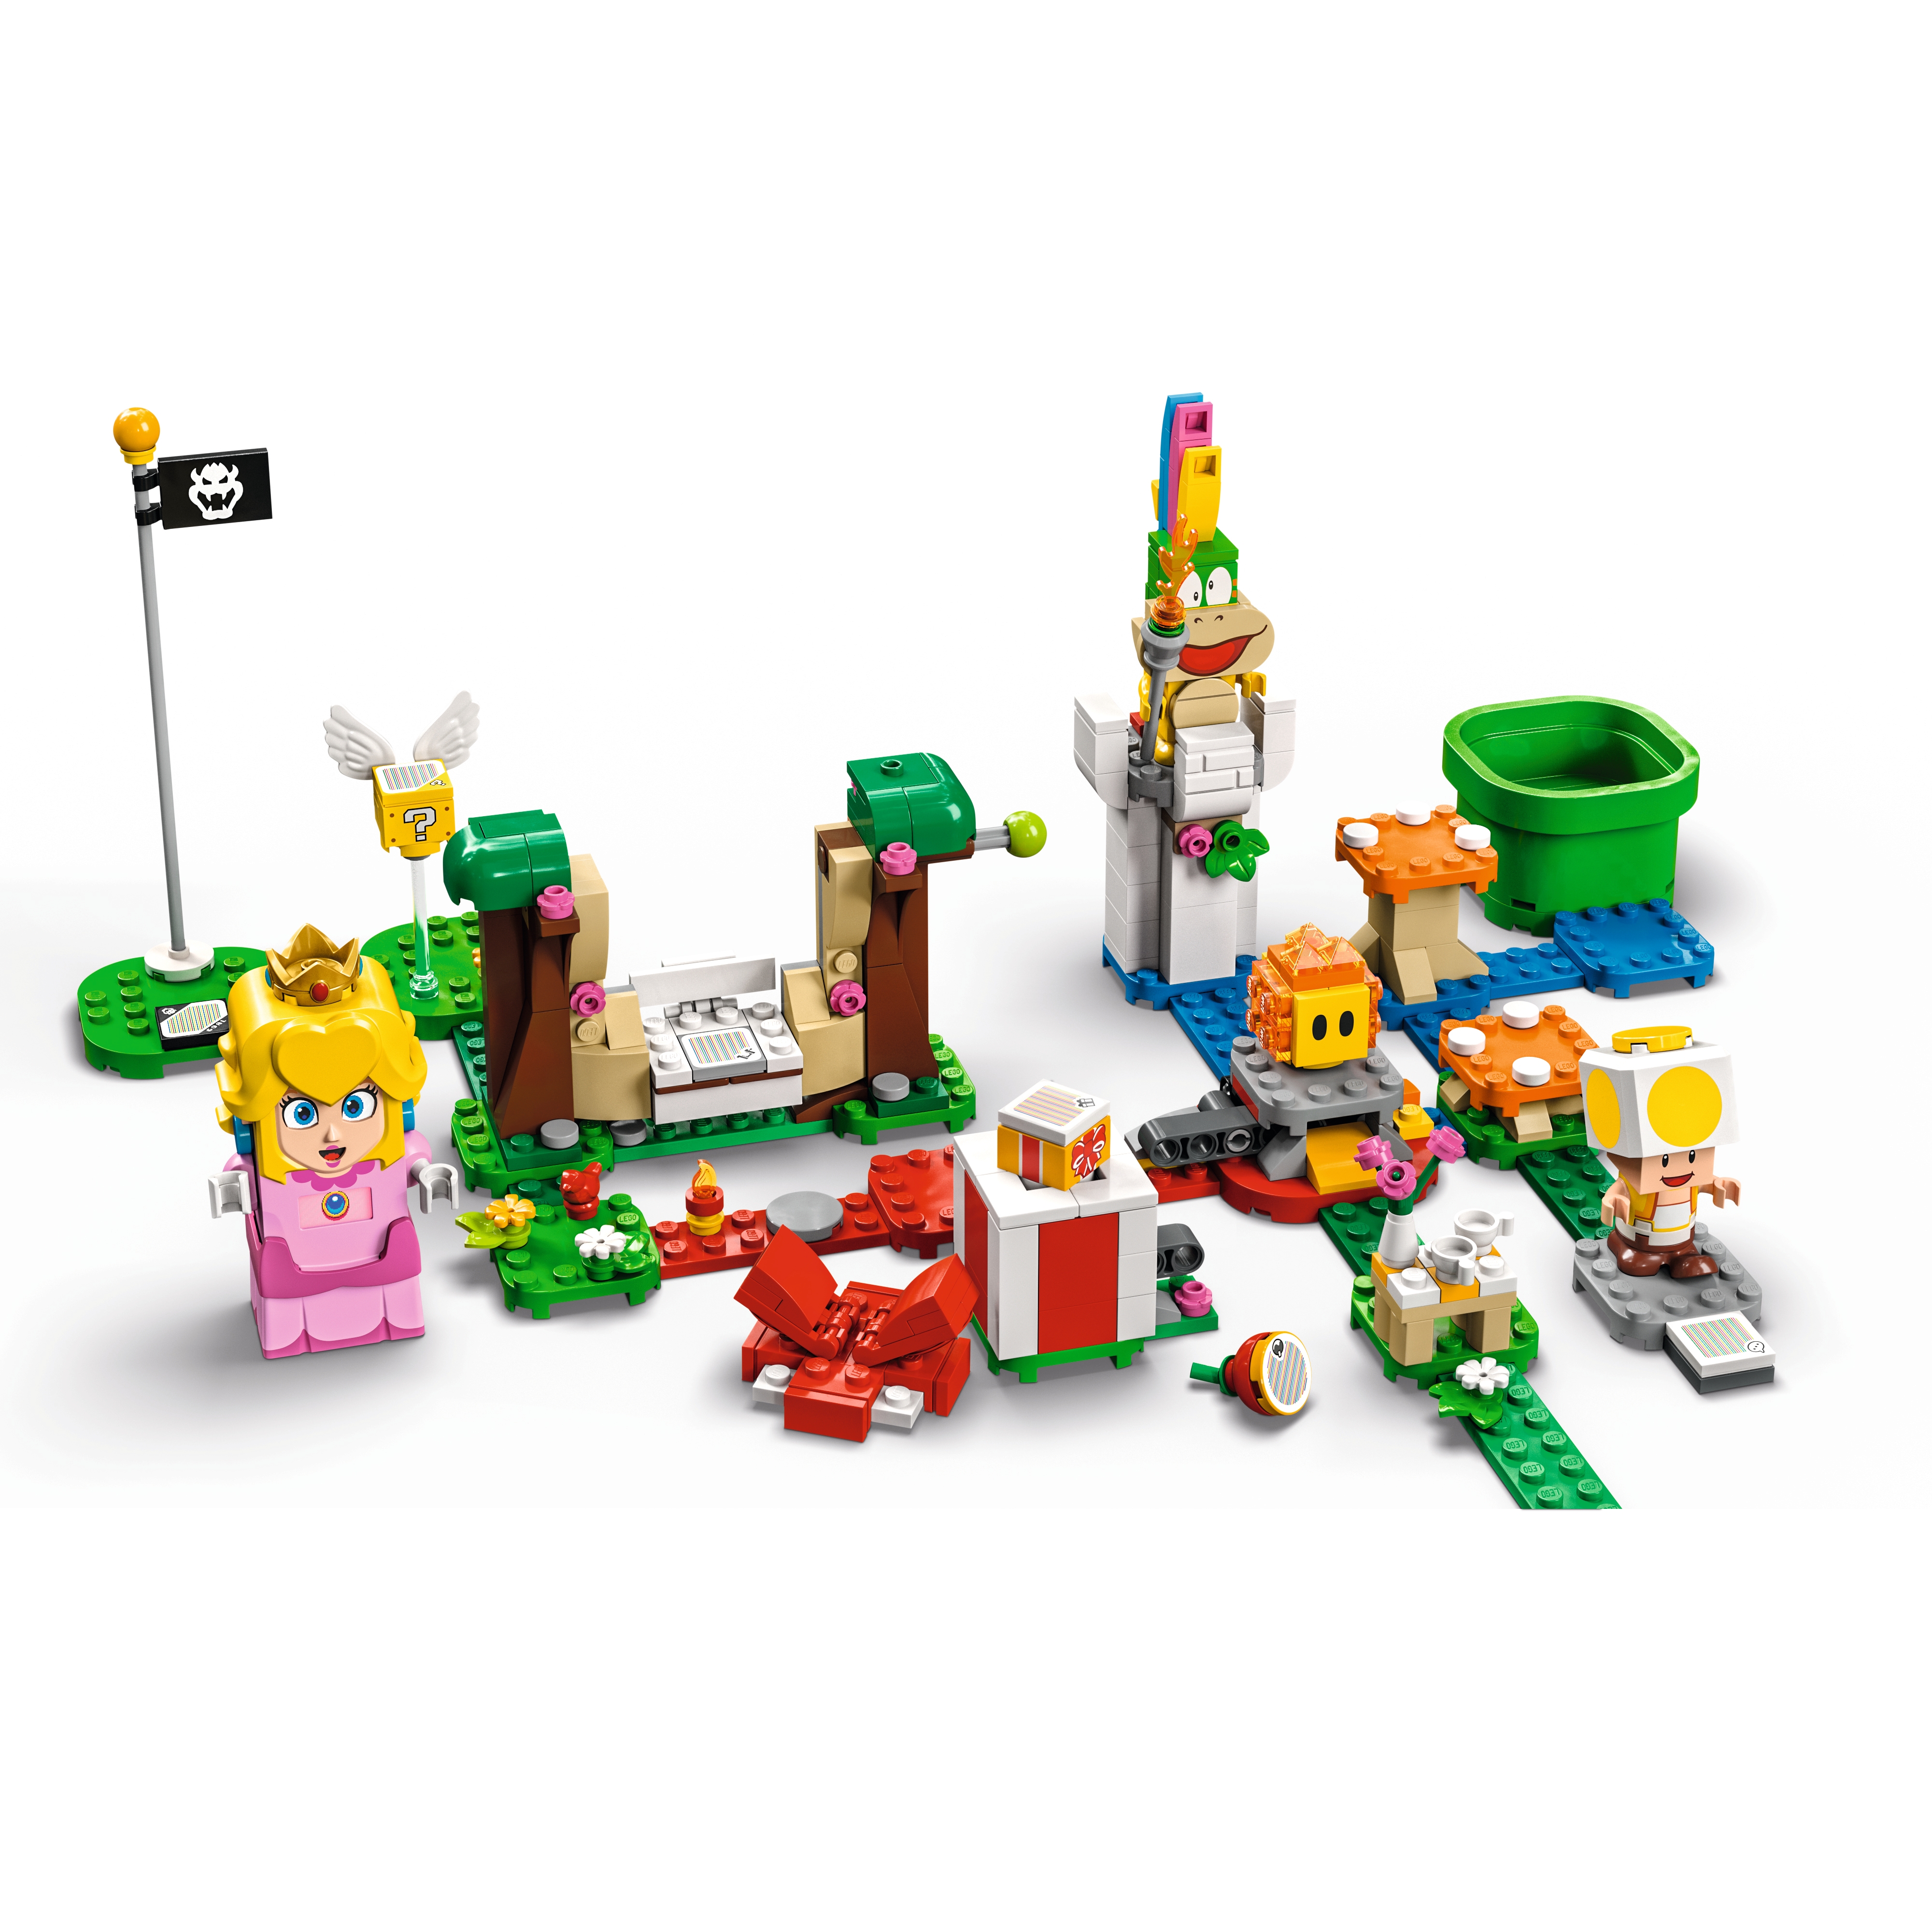 Lego reveals $269 Mighty Bowser Lego Super Mario set coming in